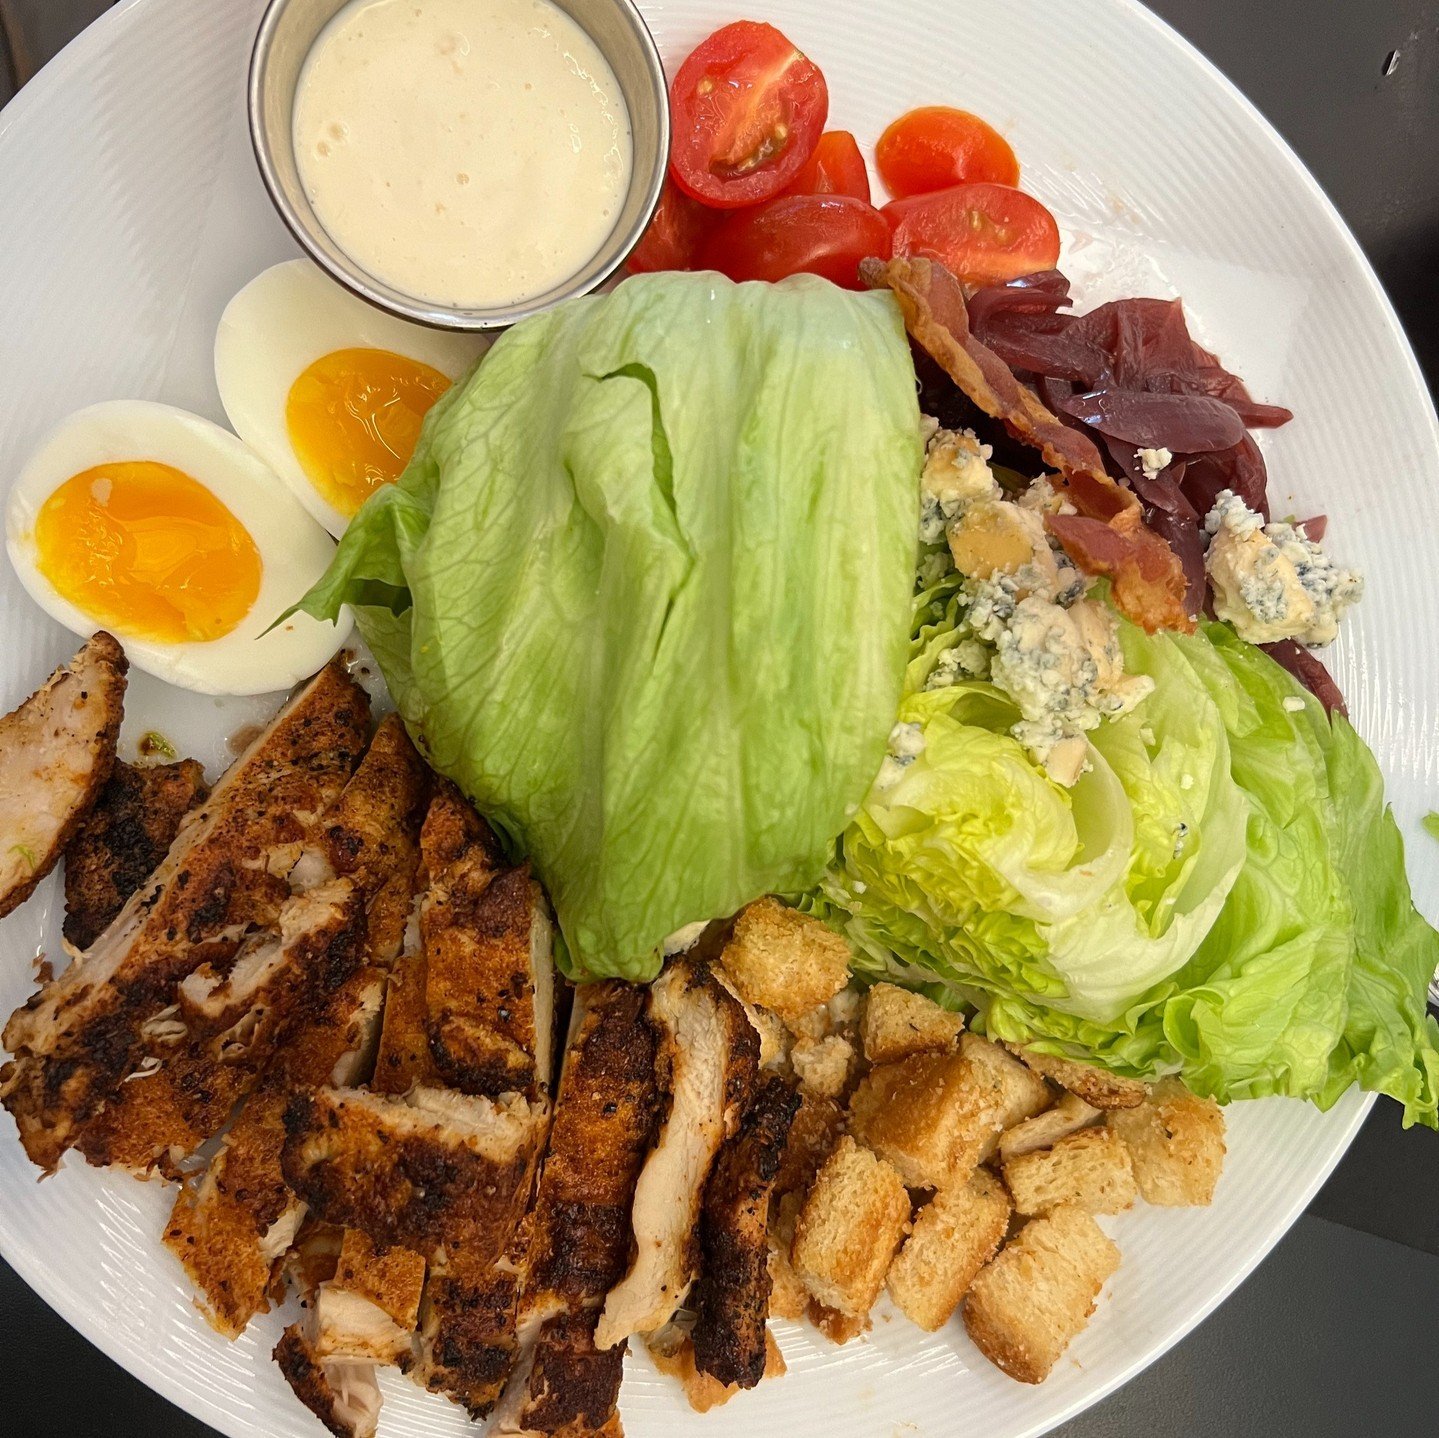 Salads taste so much better when you don't have to make them. #NationalSaladMonth
🥗 Wedge Salad w/ Blackened Chicken
🥗 Roasted Beets Salad
🥗 CZR w/ Salmon
 #salad #craveakron #eatdrinkcrave #akroneats #eatlocalohio #akron #akronohio #summitcounty 